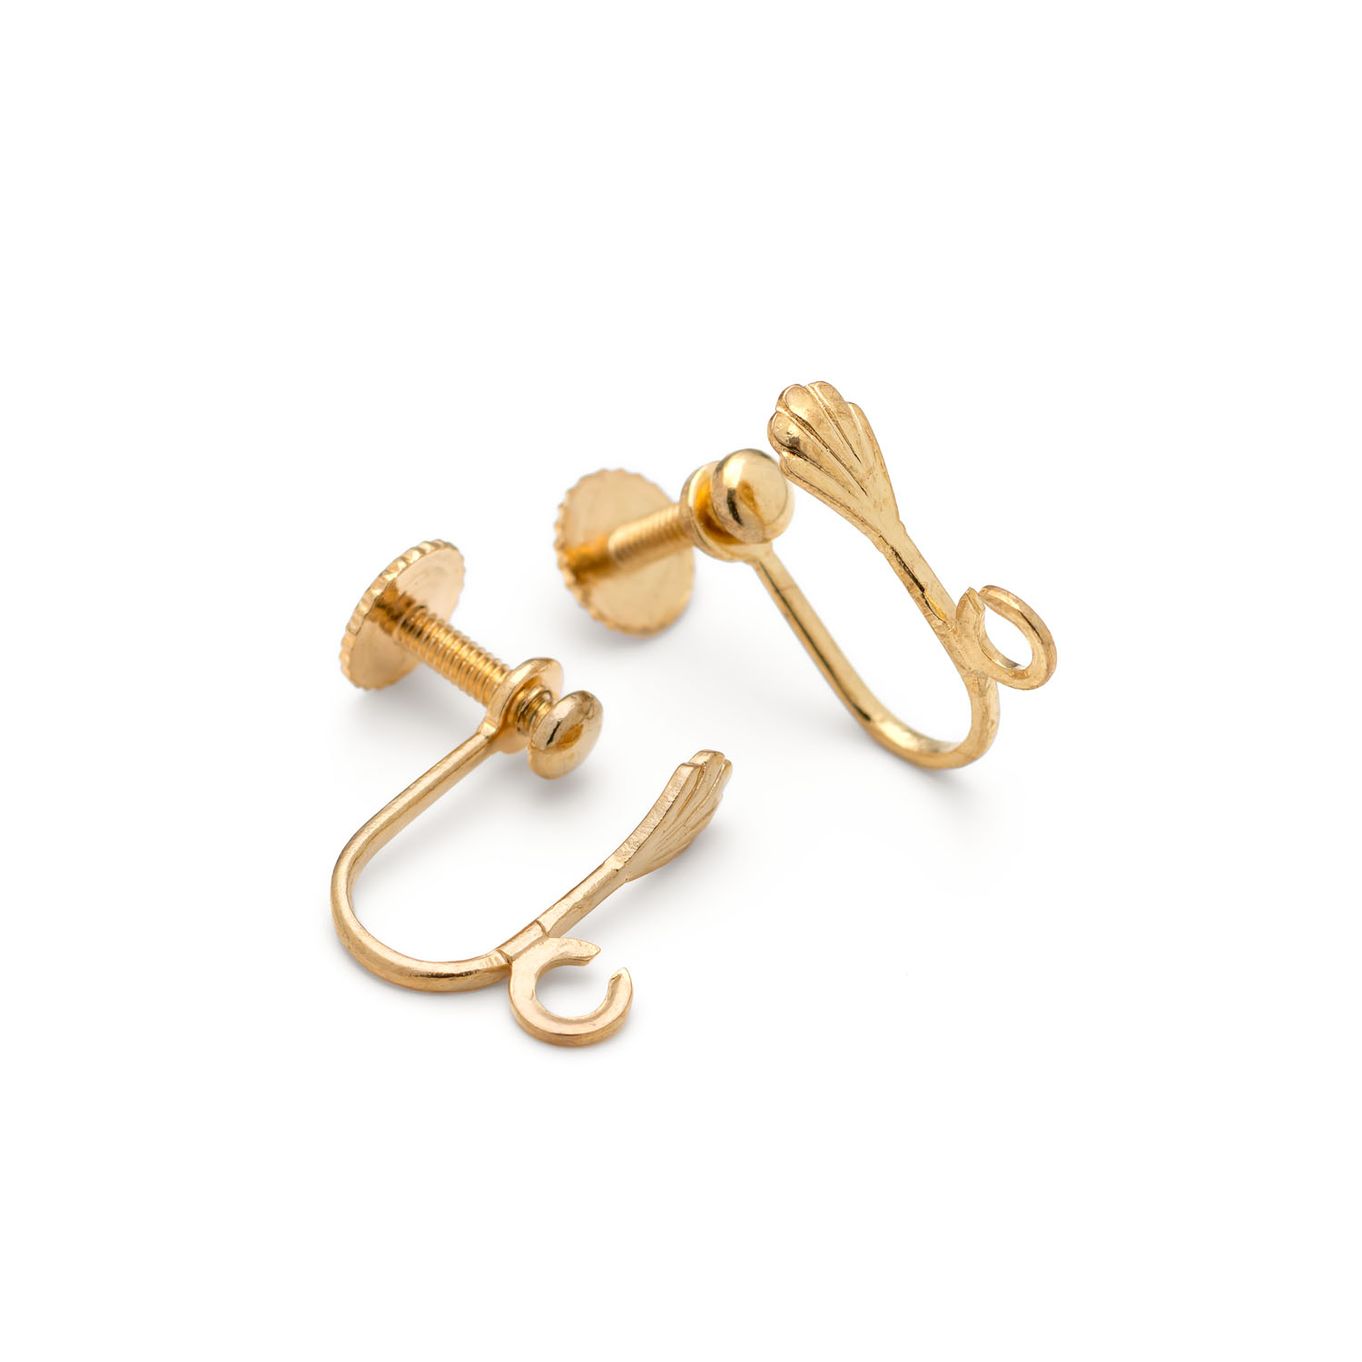 2 Pairs Gold Plated Clip On Clipon Earrings Findings